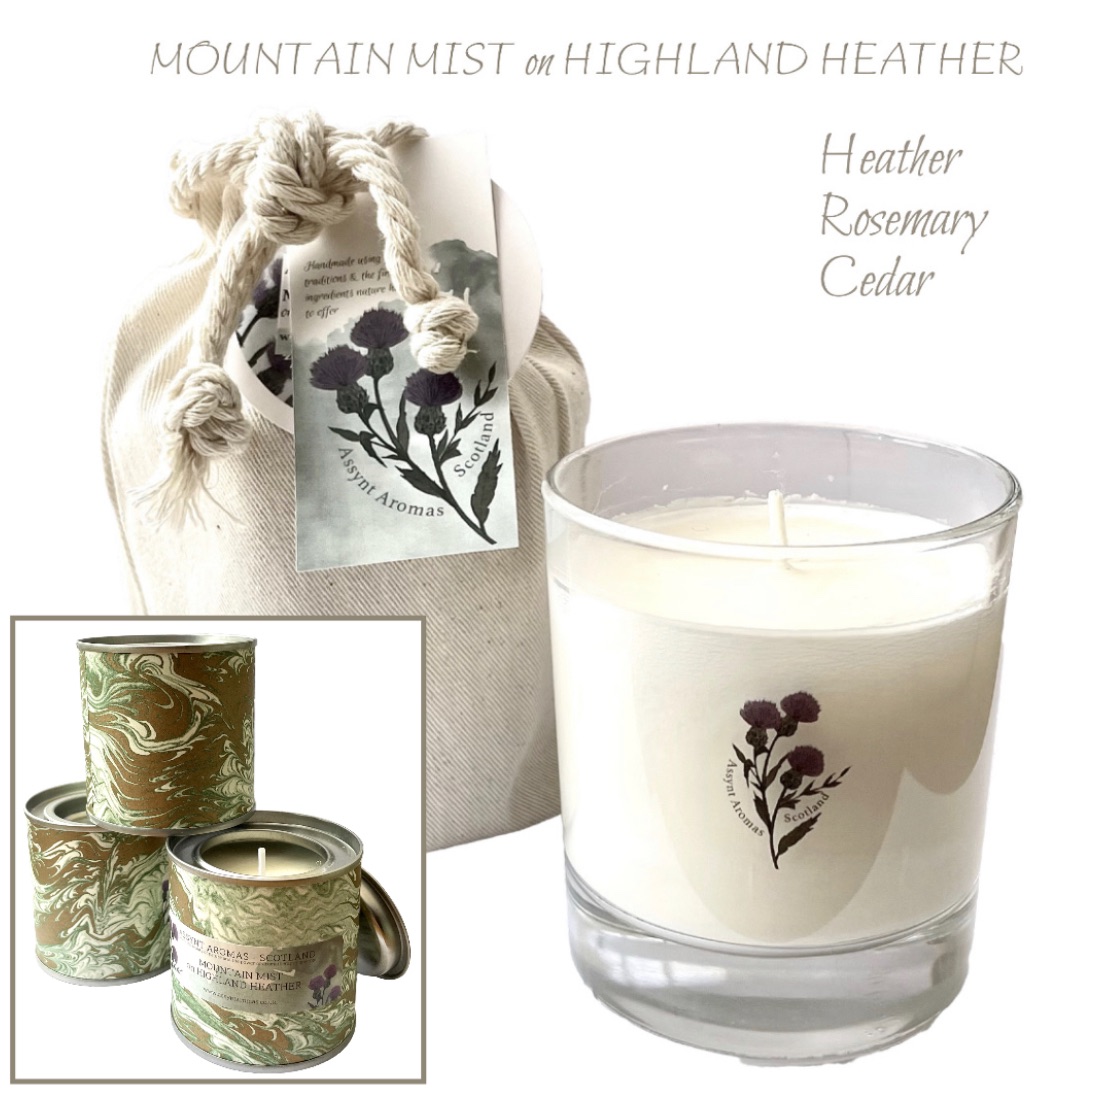 Mountain Mist on Highland Heather - natural essence plant wax candle with Heather, rosemary & cedar